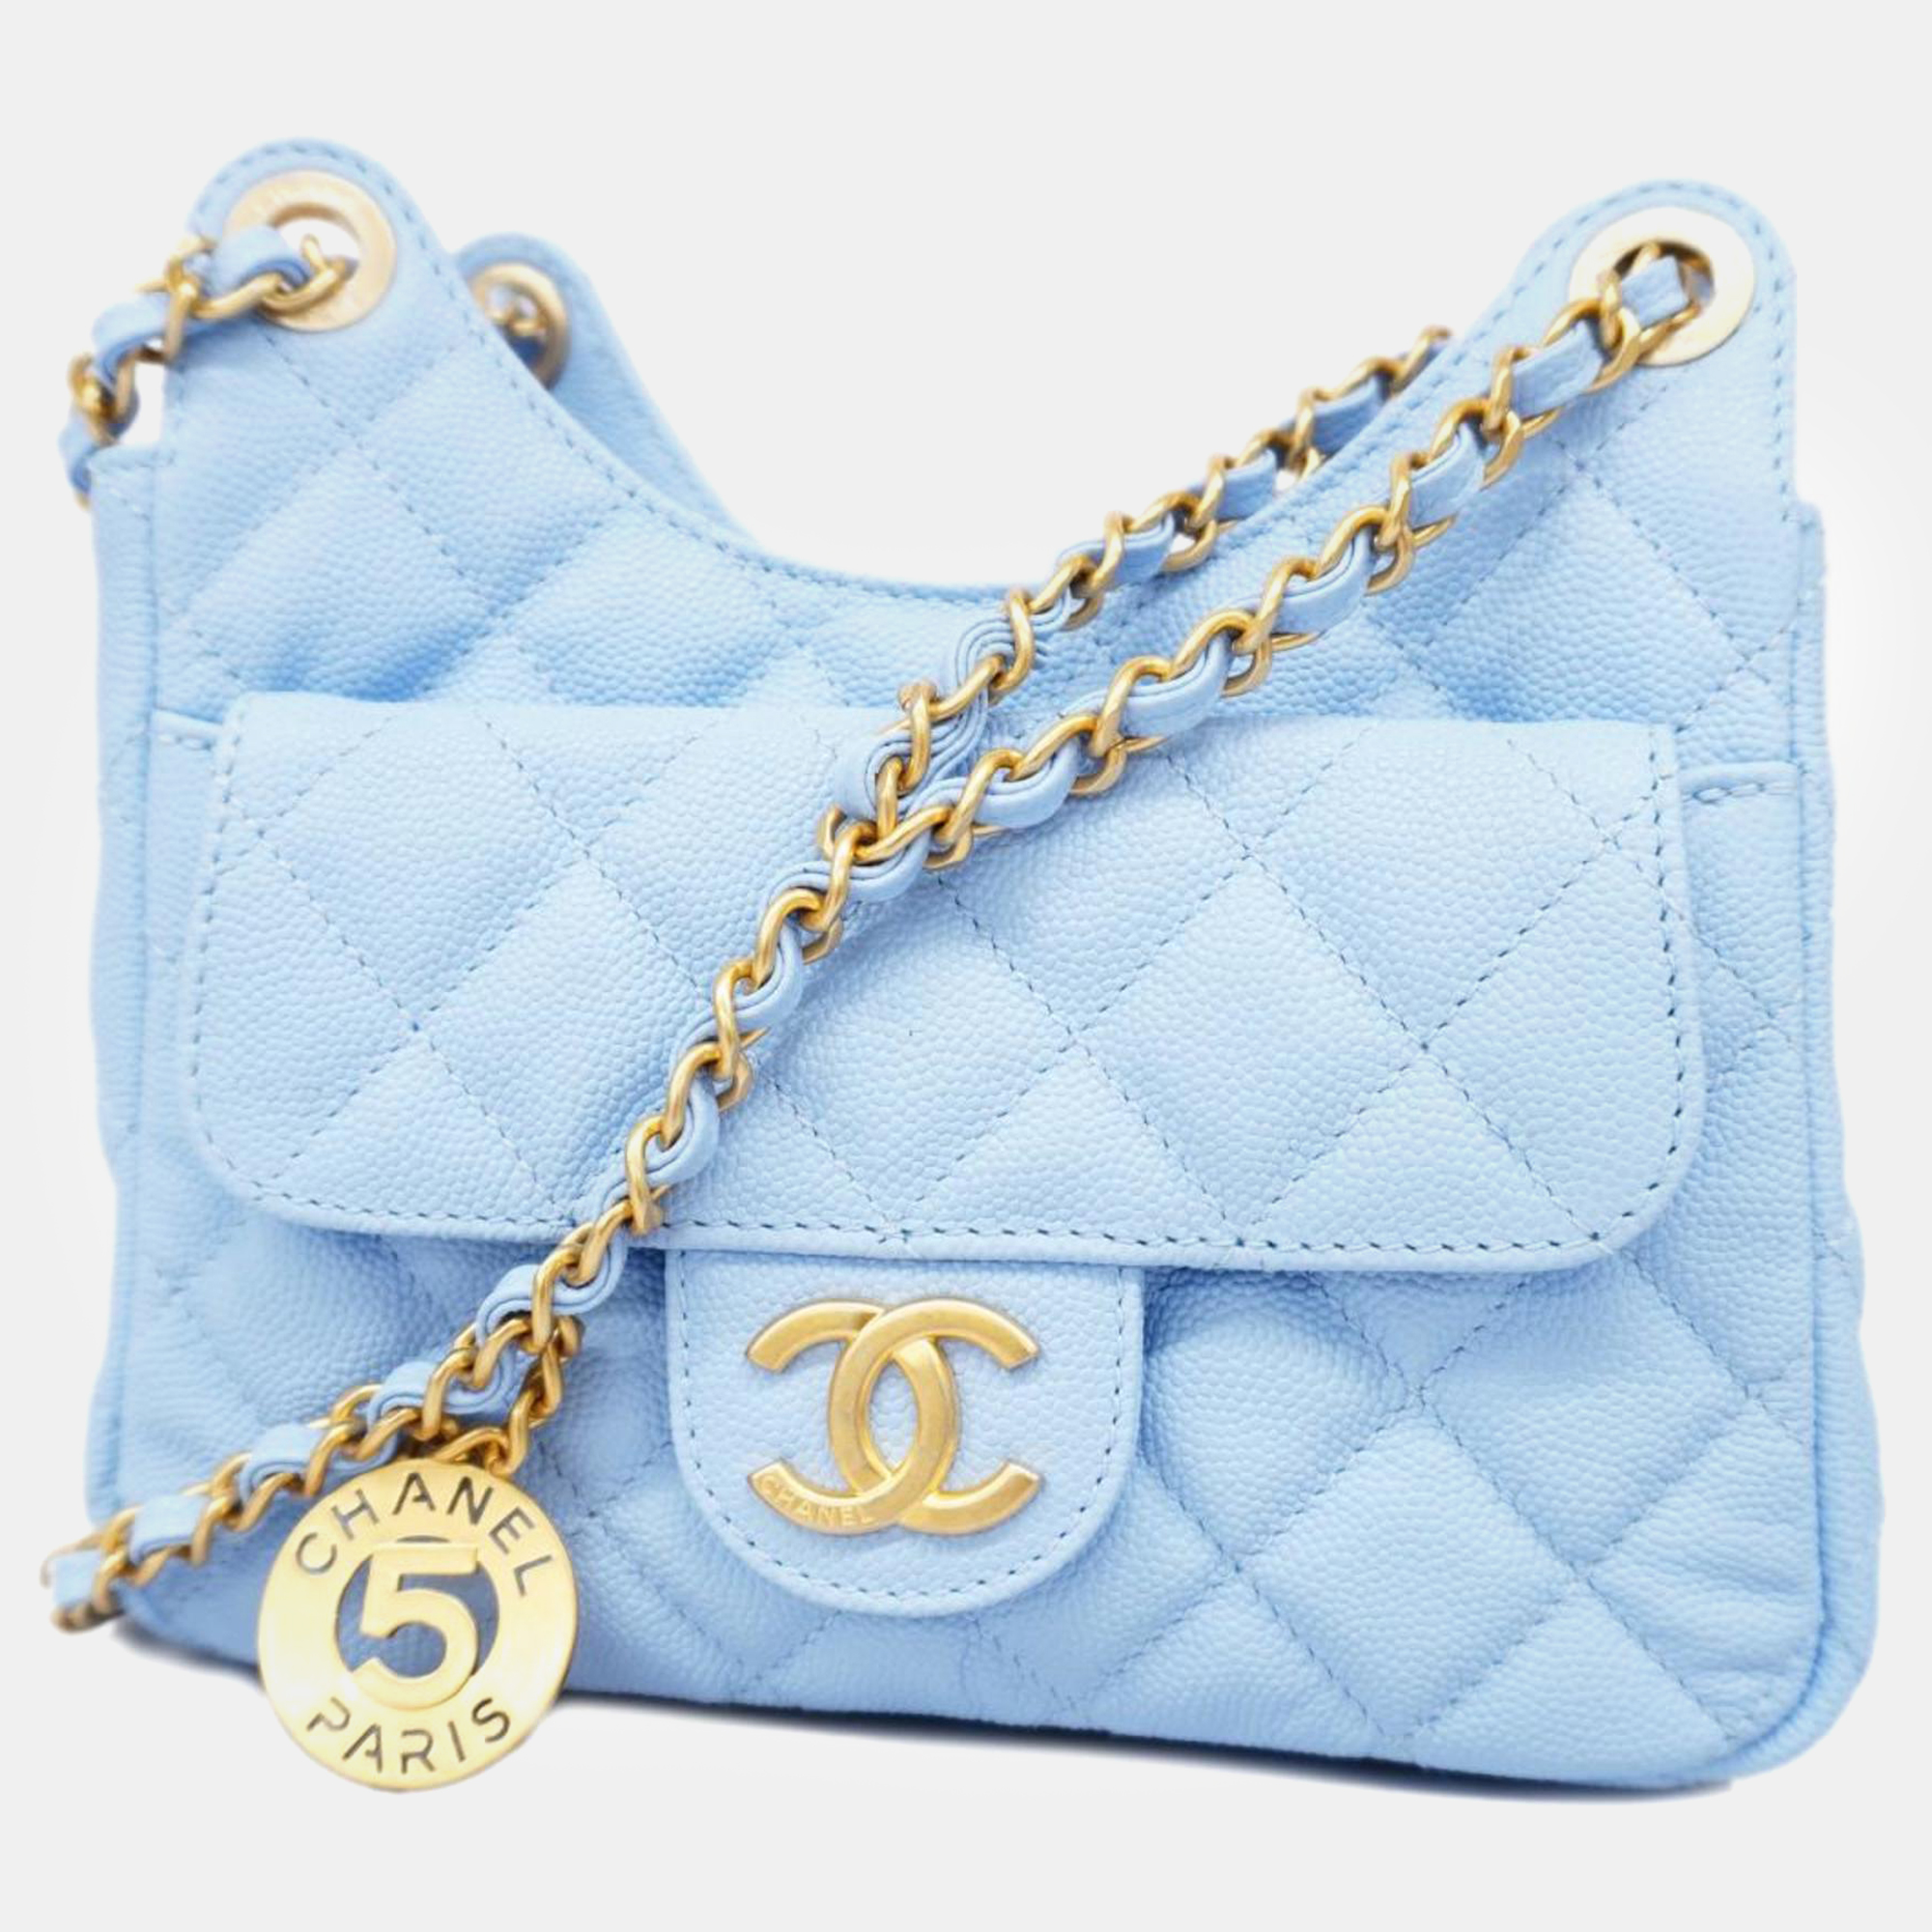 Carry this lovely Chanel bag as a stylish accompaniment to your ensemble. Made from high quality materials it has a luxe look and durable quality.